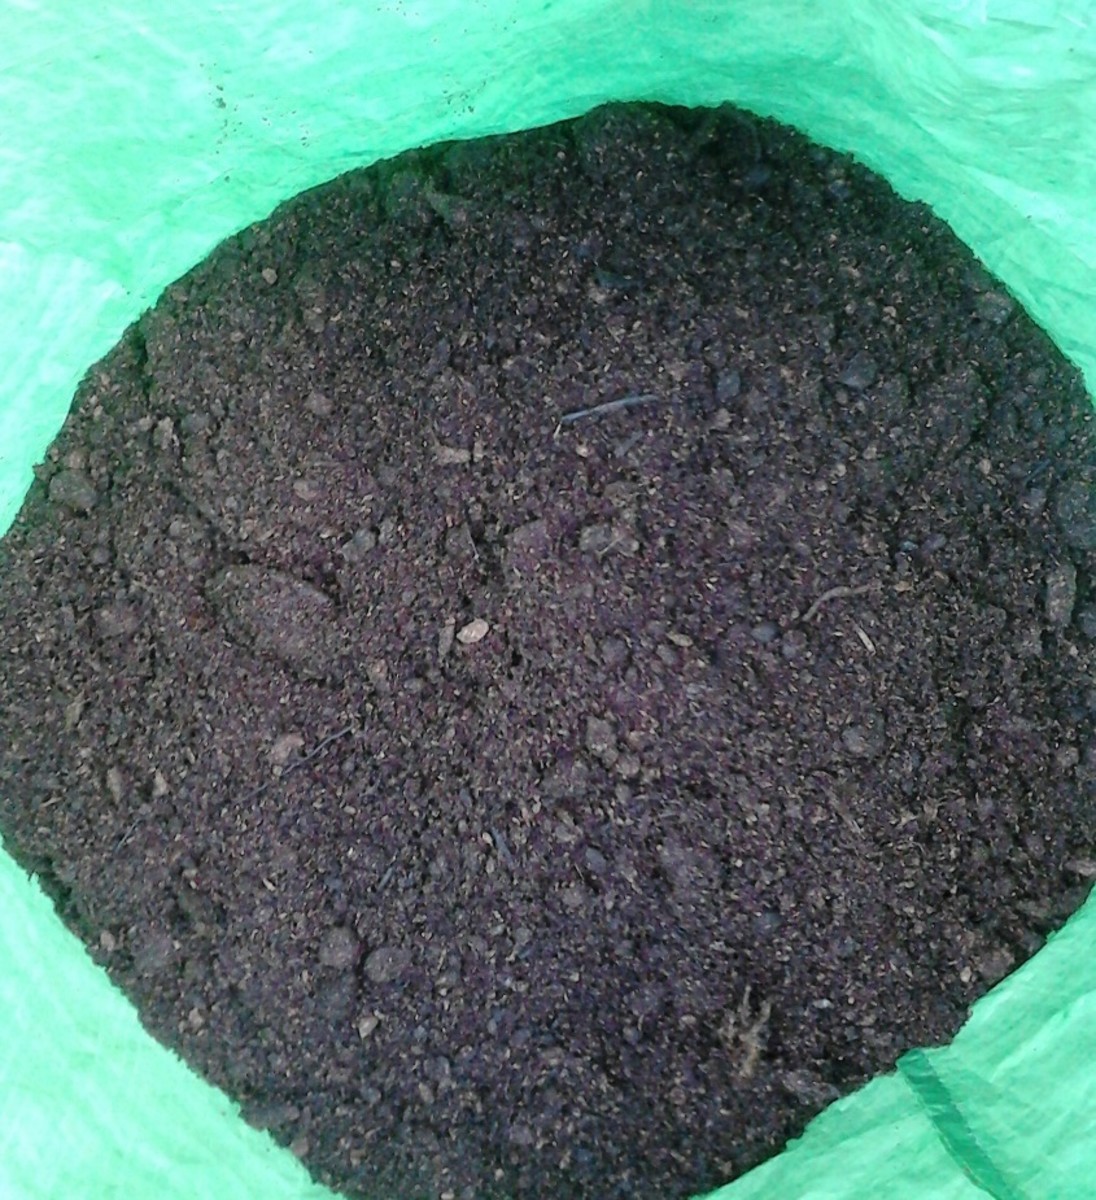 Once you have placed your potatoes in the potato bag, cover them with a layer of compost and give the good watering.